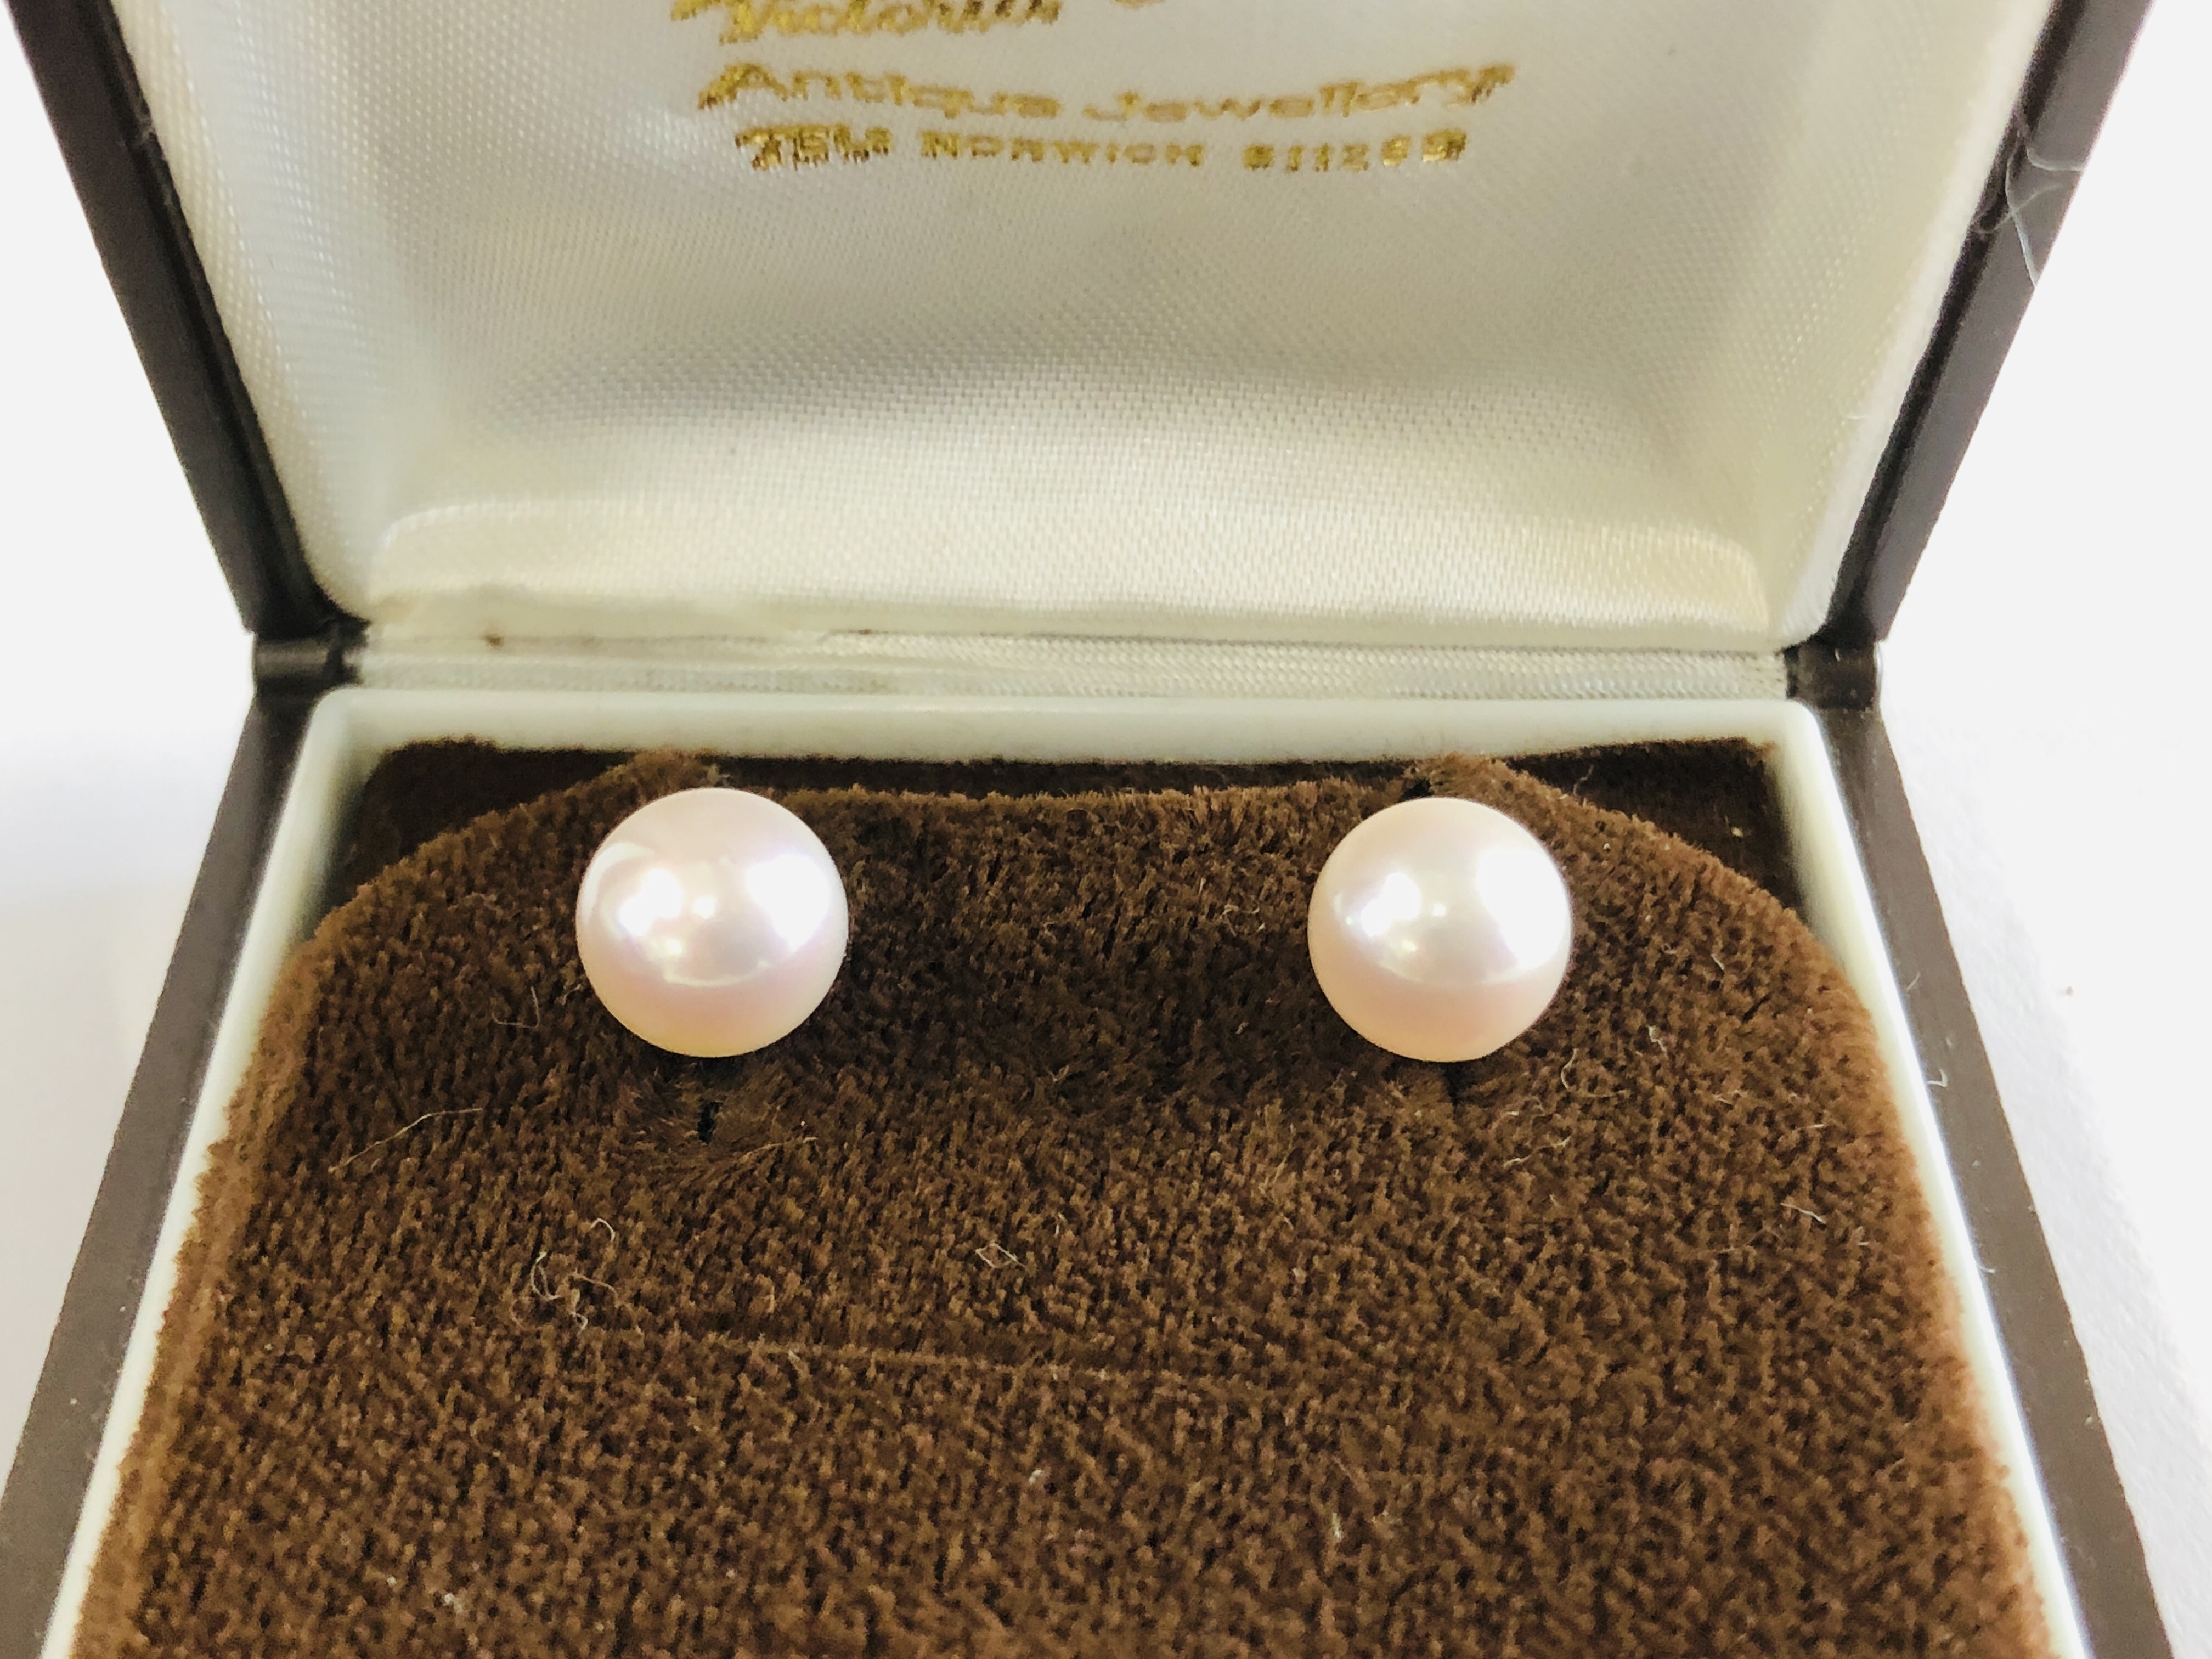 TWO PAIRS OF 9CT GOLD STUD EARRINGS, STONE SET AND PEARL EARRINGS. - Image 2 of 5